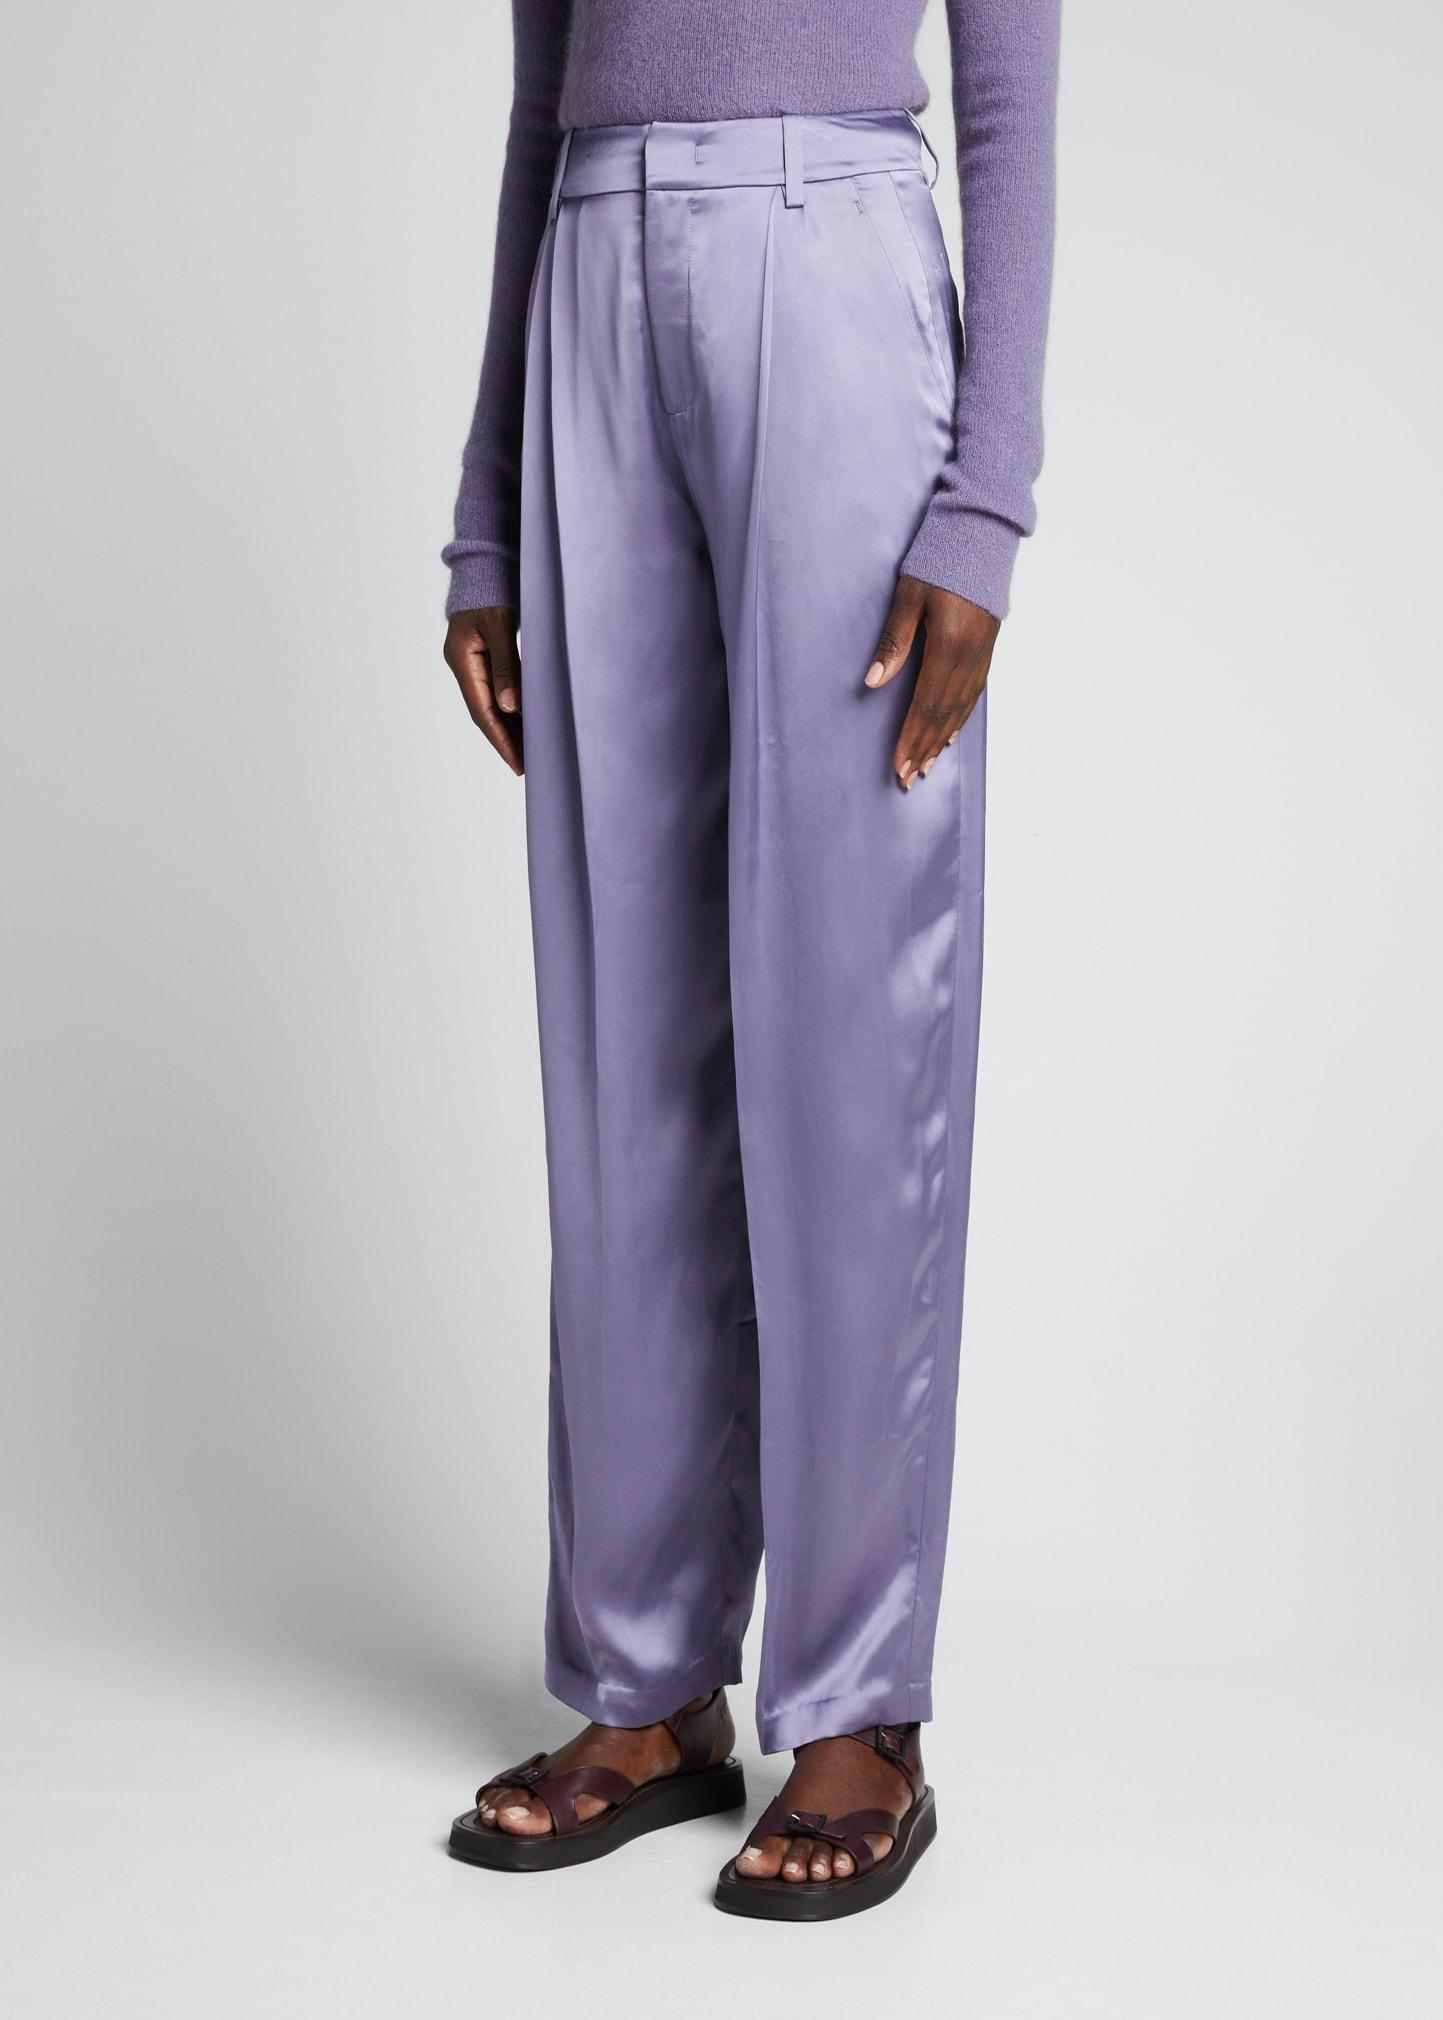 Vince Pleated-front Shiny Satin Pants in Purple | Lyst